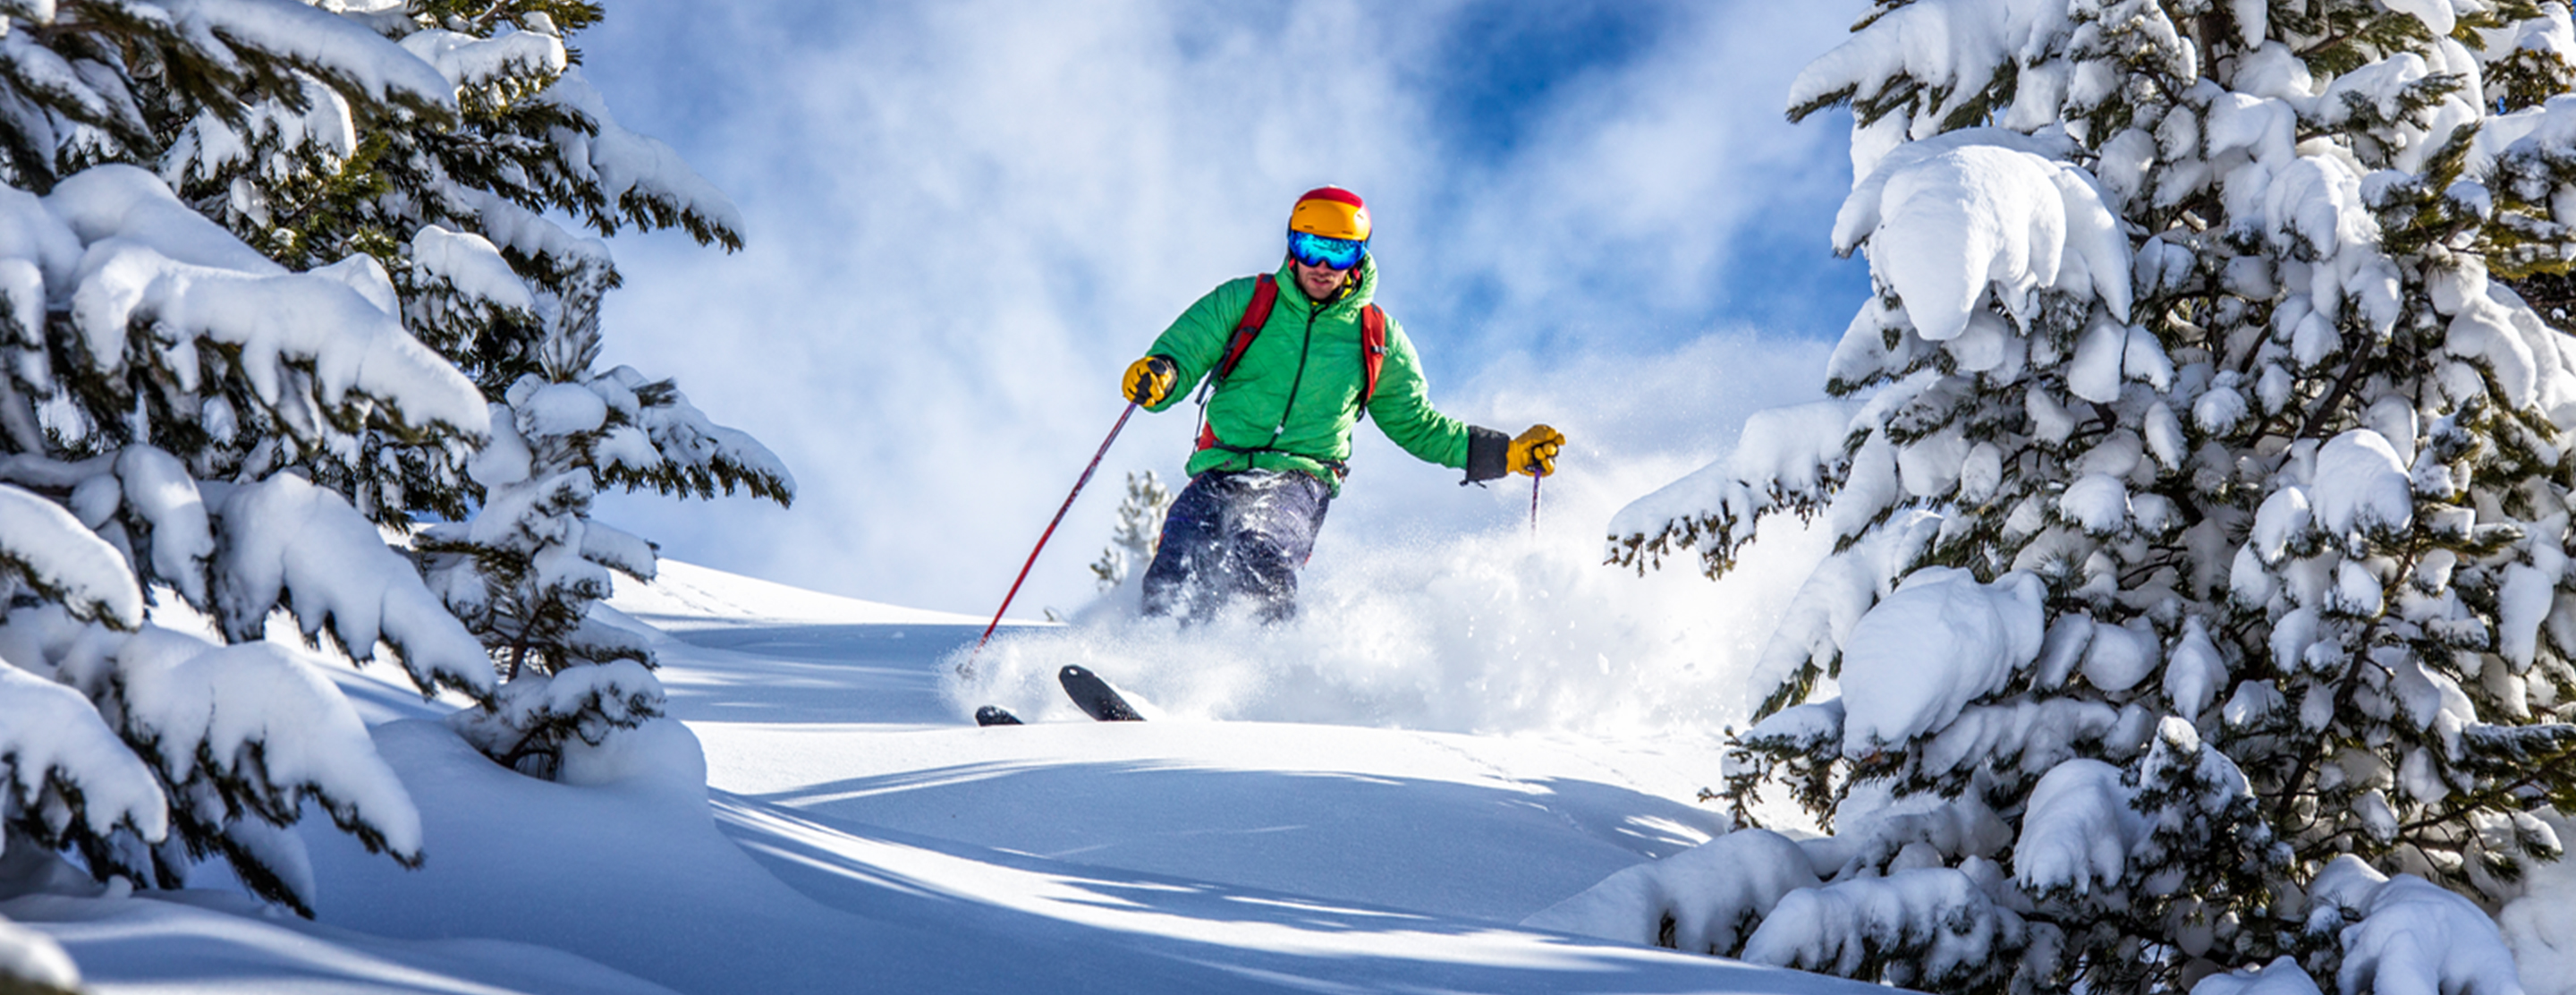 Elemental Seem Counsel Ski and Snowboard Safety Tips | Patient Education | UCSF Health